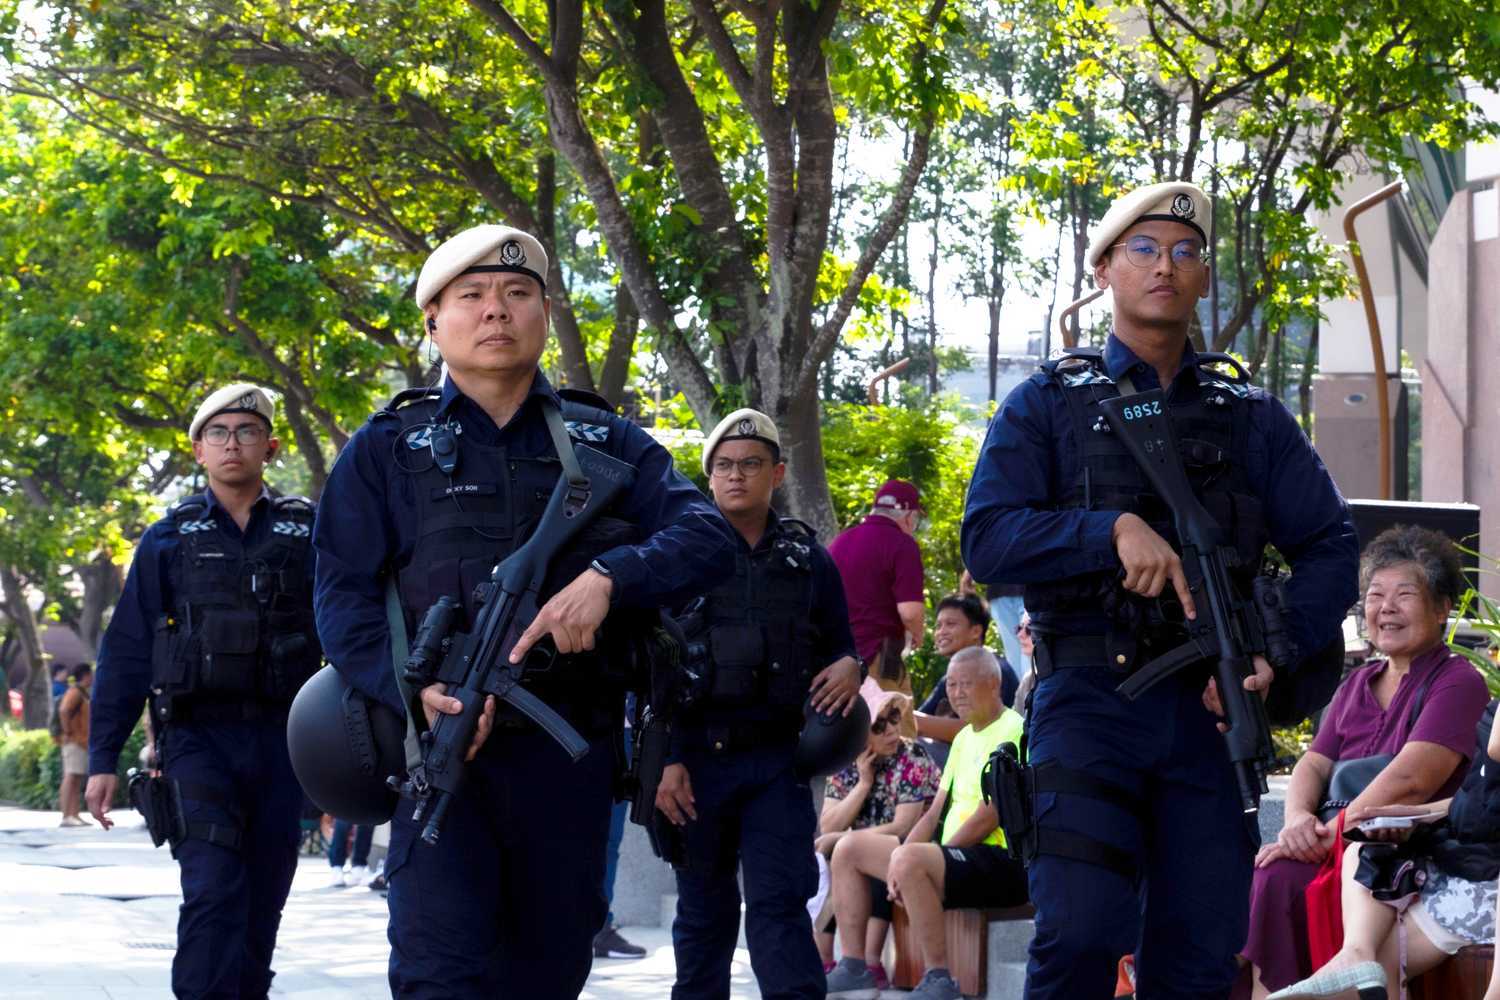 The Protective Security Command (ProCom) In-Situ Reaction Team (IRT) officers patrolling the area surrounding the NDP to ensure everyone's safety. The officers look focused and alert, and are holding on to their Heckler and Koch MP5 submachine gun. There is an elderly lady to the right of the photo seated on a bench smiling as she looks at the officers.